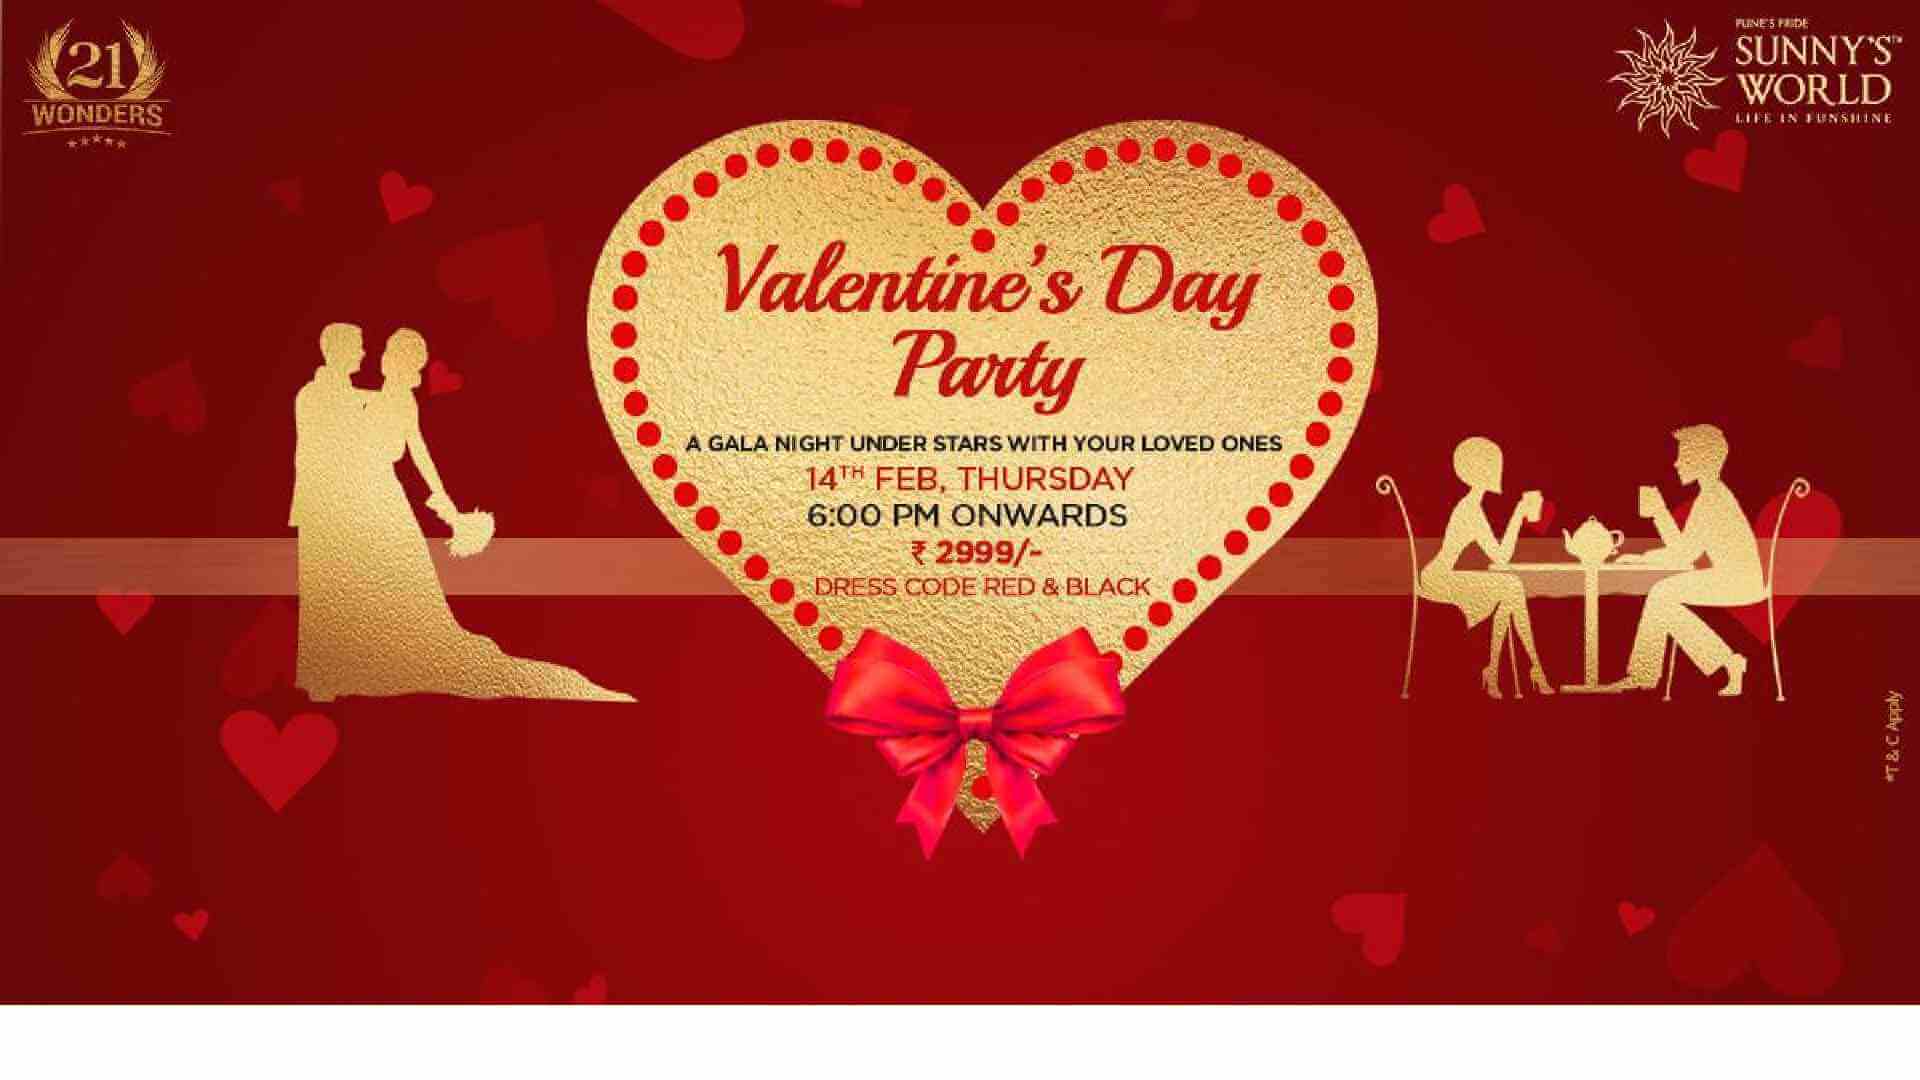 Valentine day events near me